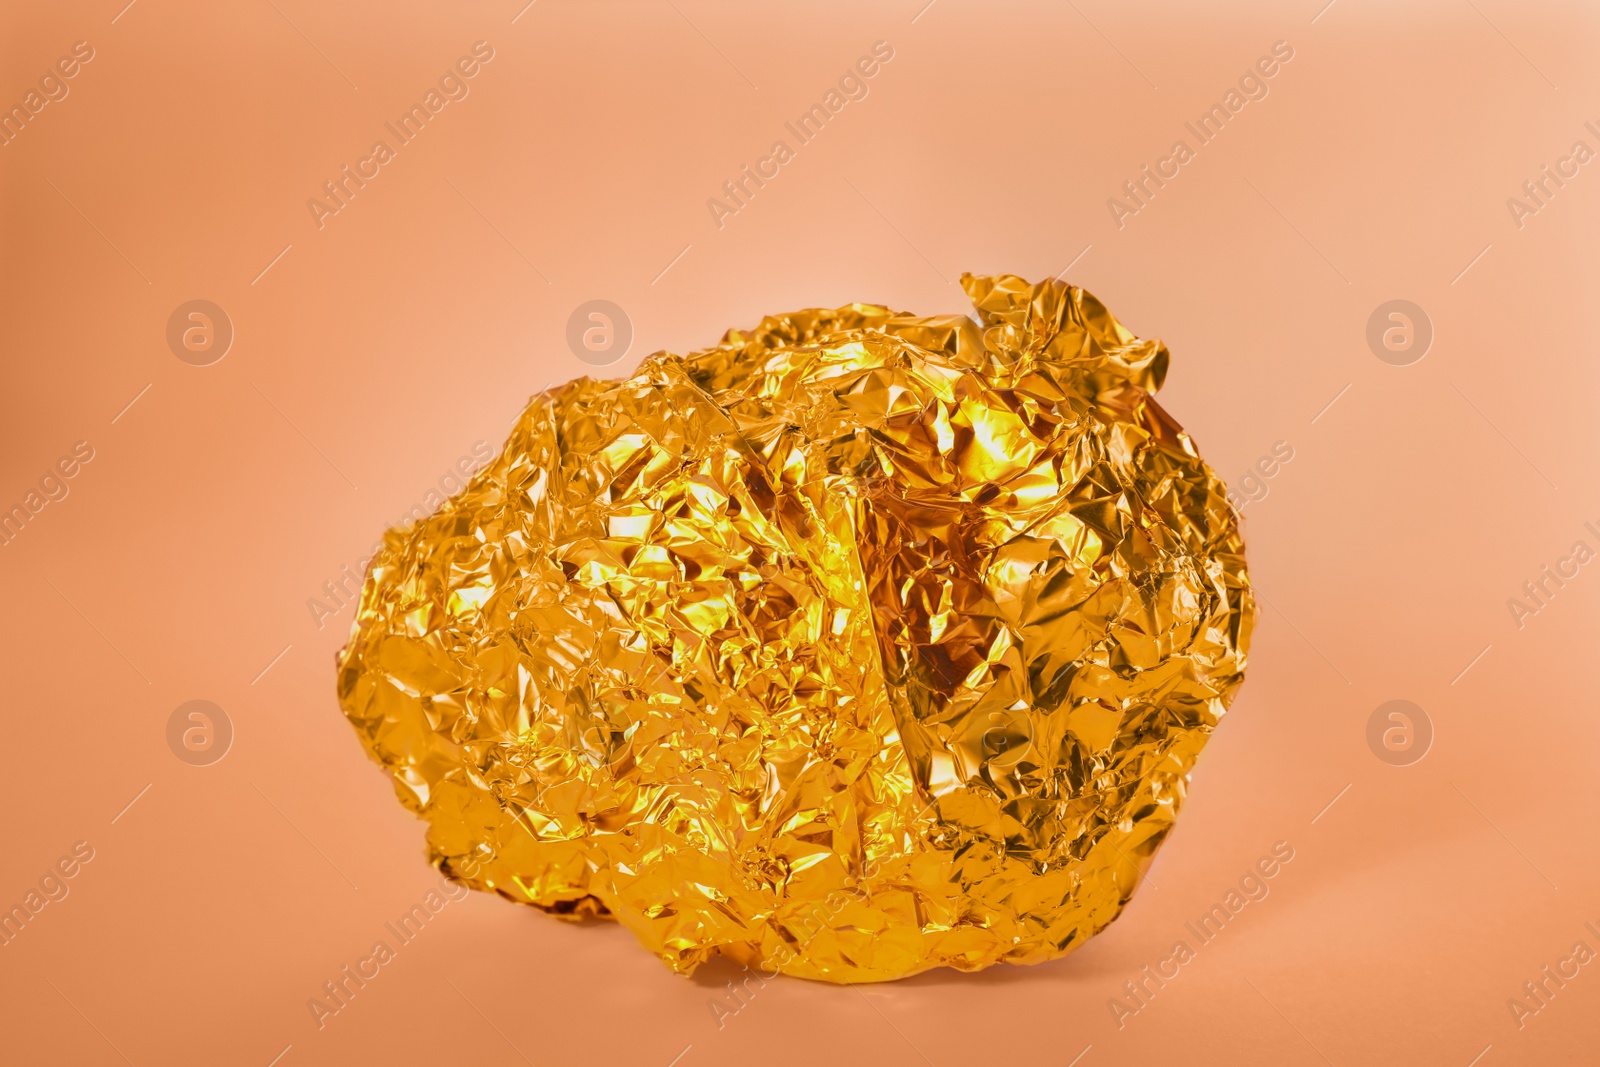 Photo of Crumpled ball of gold foil on light background, color tone effect